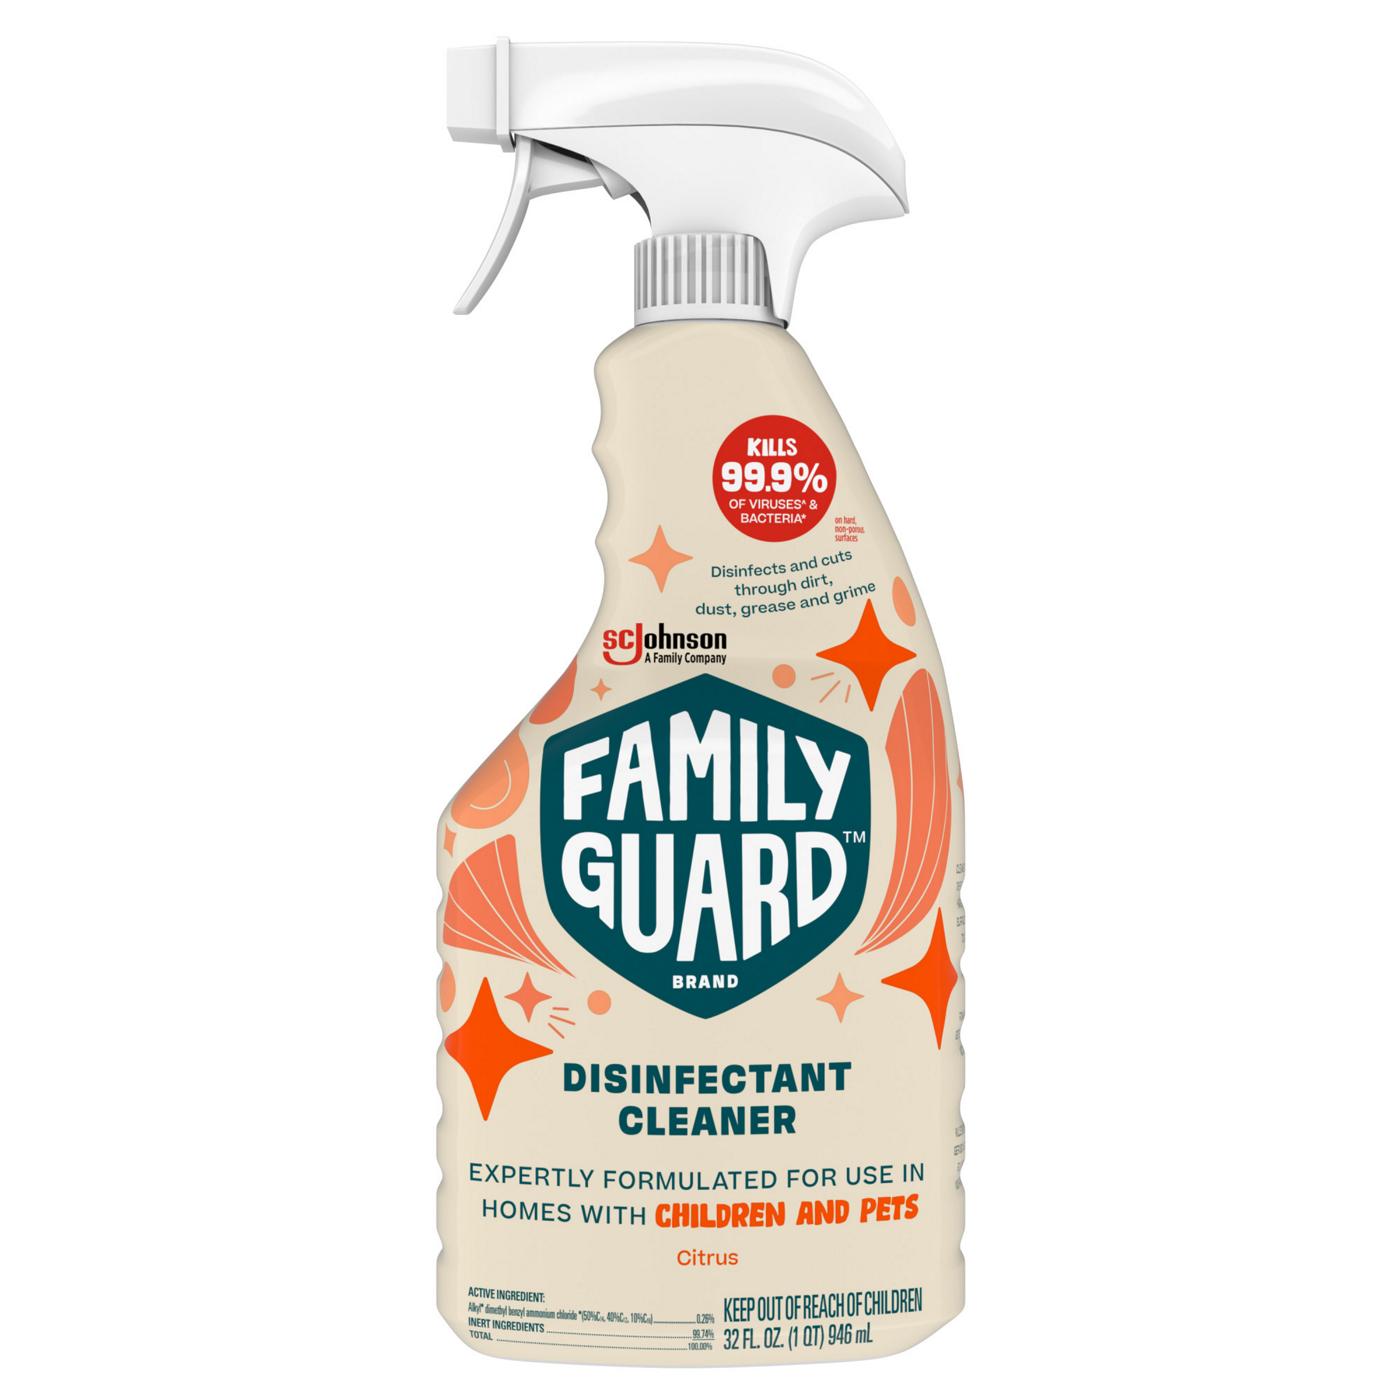 Family Guard Citrus Disinfectant Cleaner; image 1 of 10